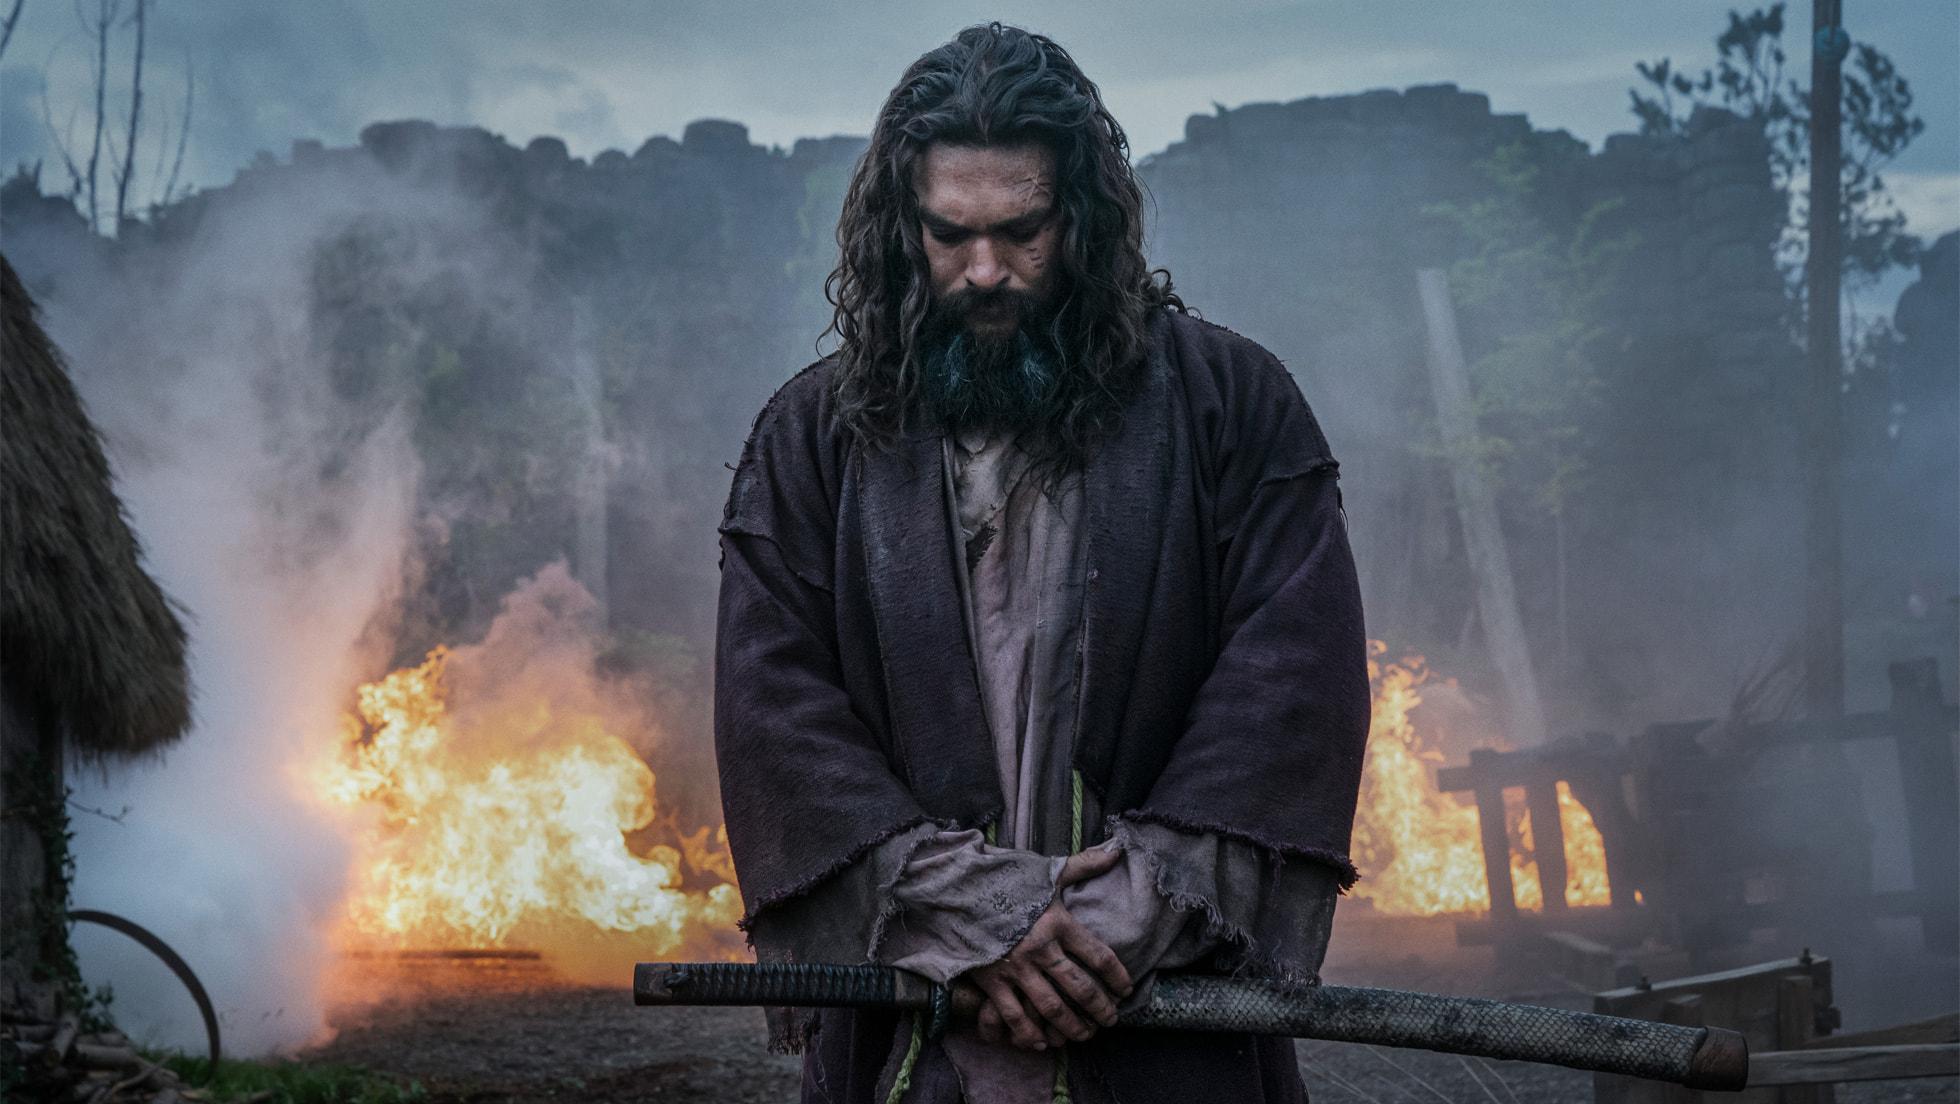 Global hit Apple Original drama “See,” starring Jason Momoa, to return for third and final season on Friday, August 26. Apple TV+ unveils first look at the final chapter in new teaser video.